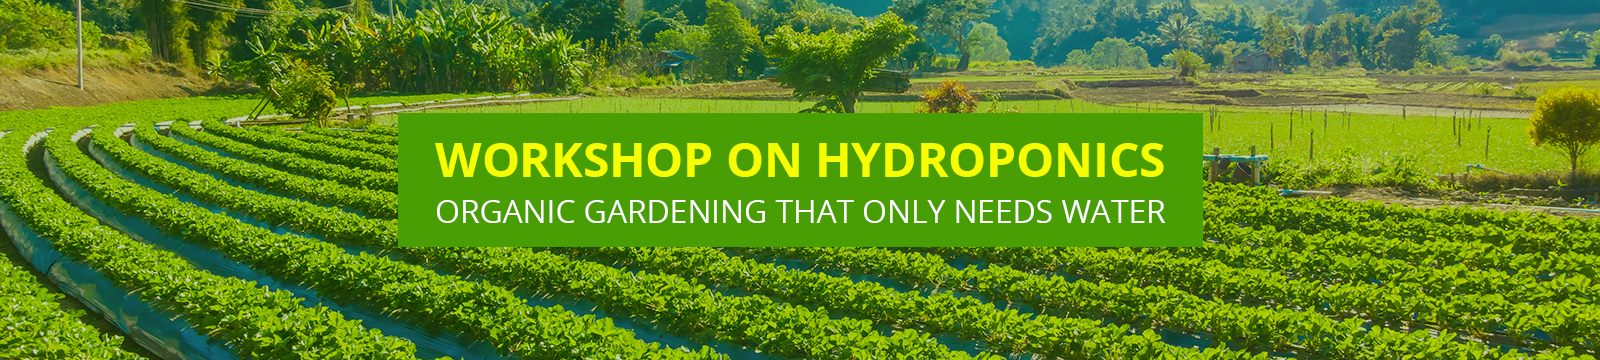 Workshop on Hydroponics – Organic Gardening That Only Needs Water